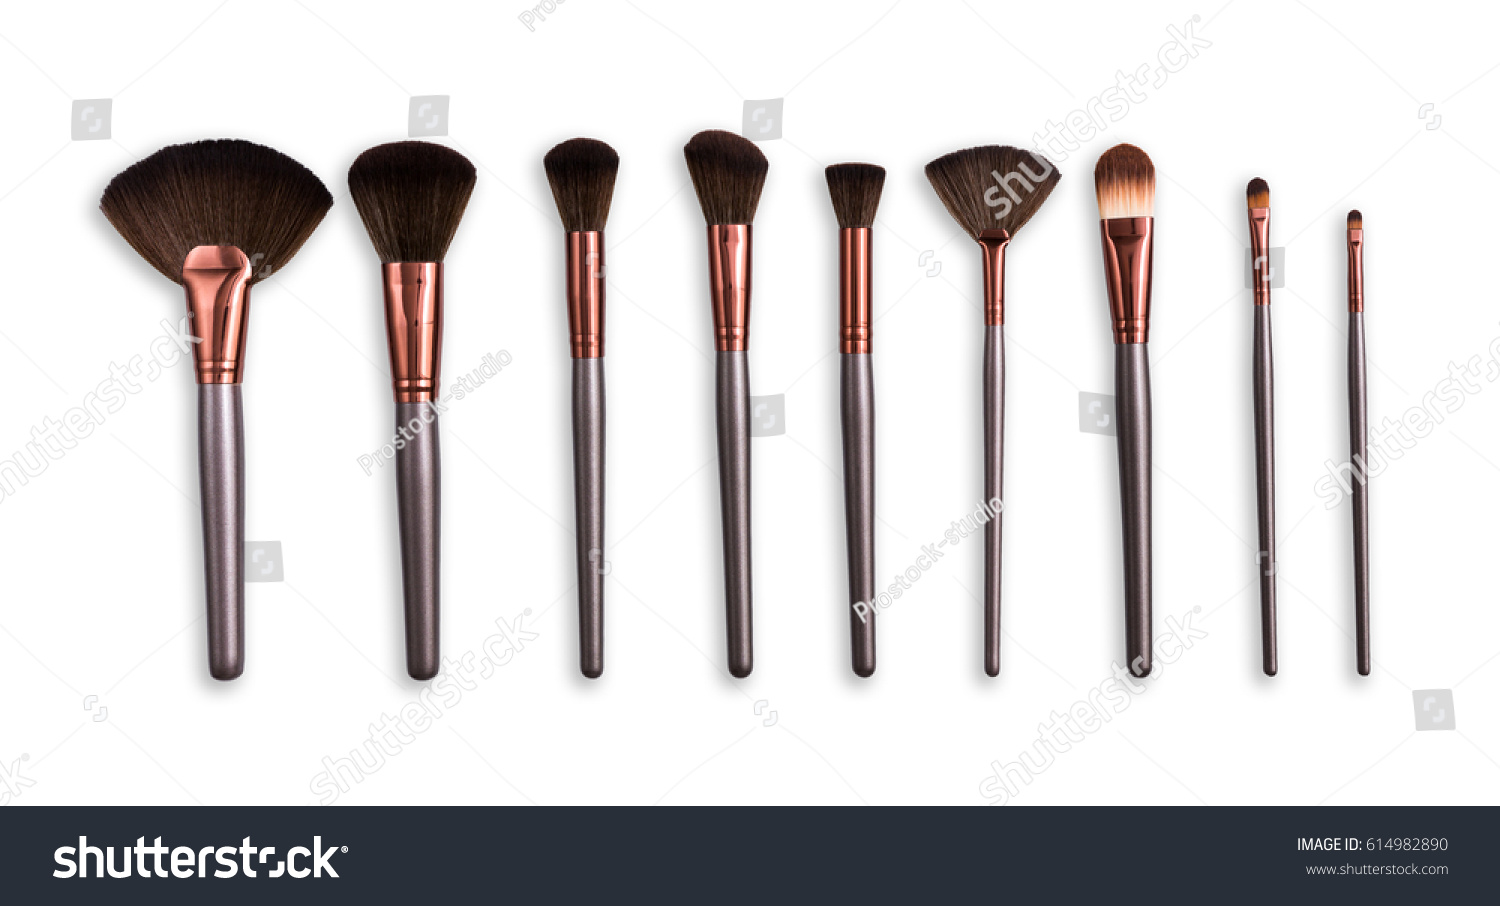 Cosmetics and beauty. Make-up brushes set in row on white isolated background #614982890